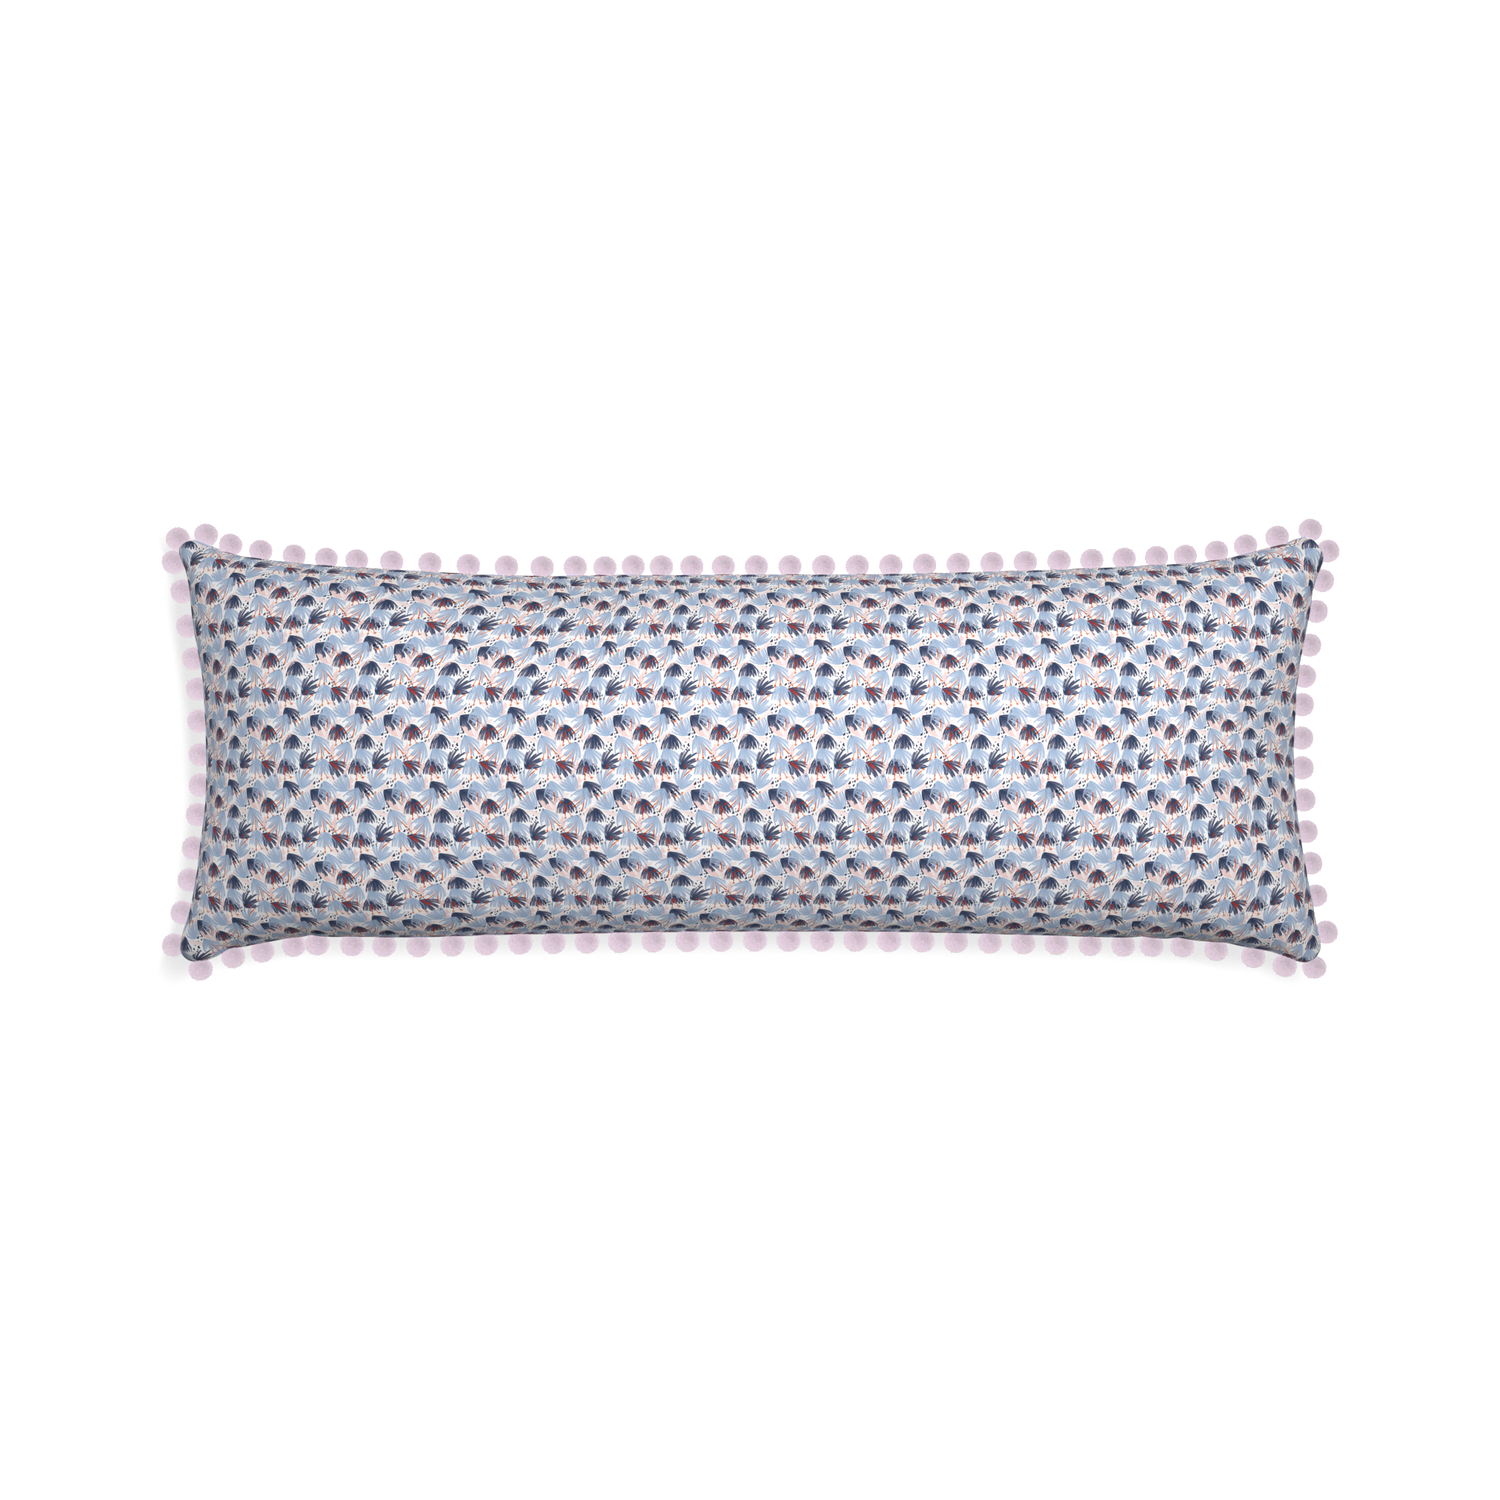 Xl-lumbar eden blue custom pillow with l on white background